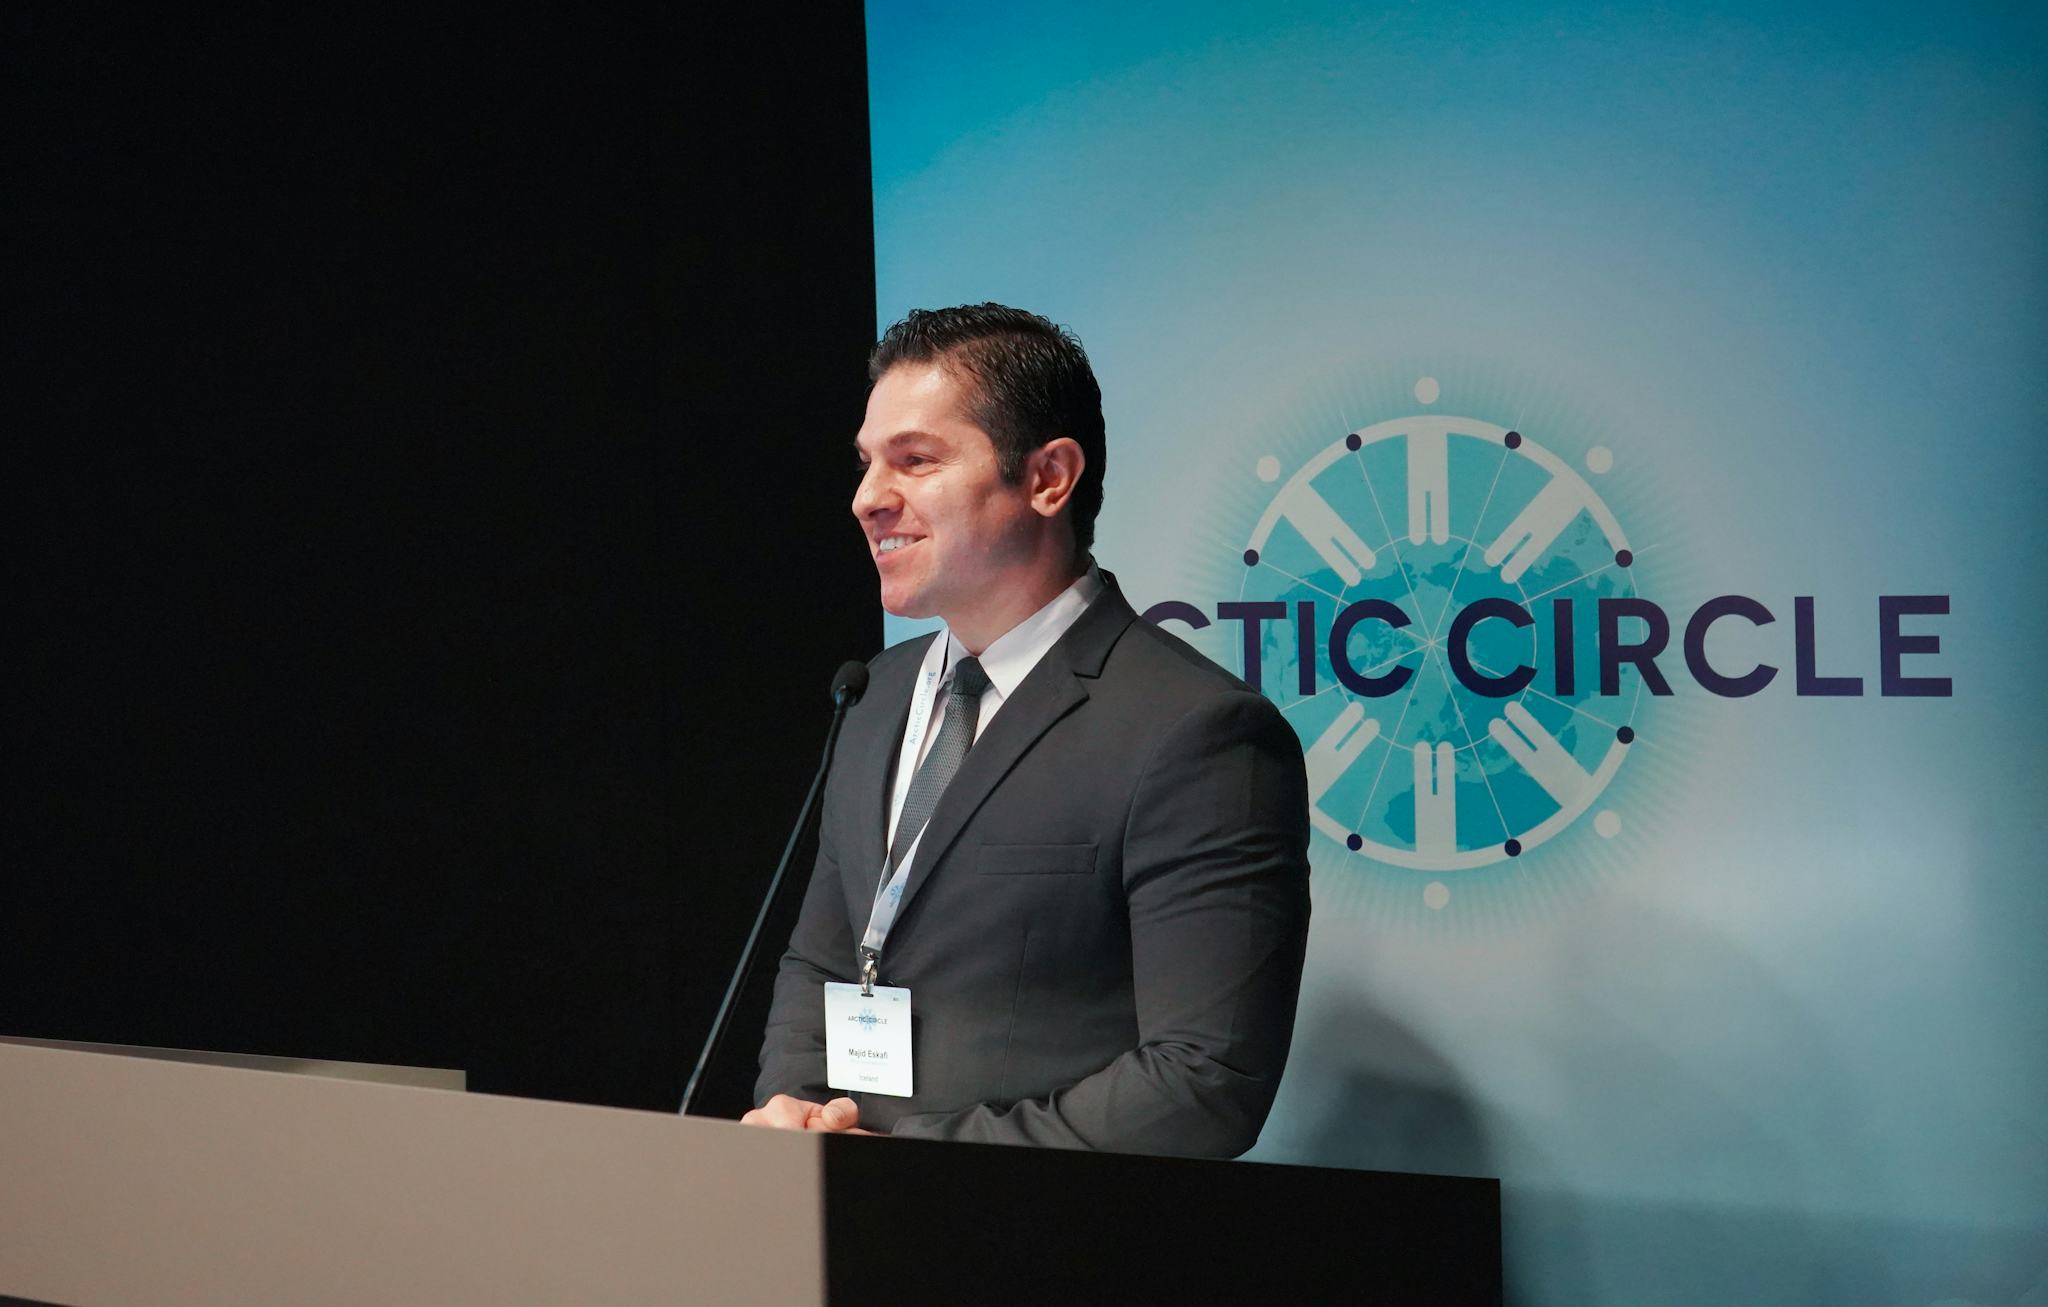 A man standing in front of a blue screen that says 'Arctic Circle' giving a speach, smiling